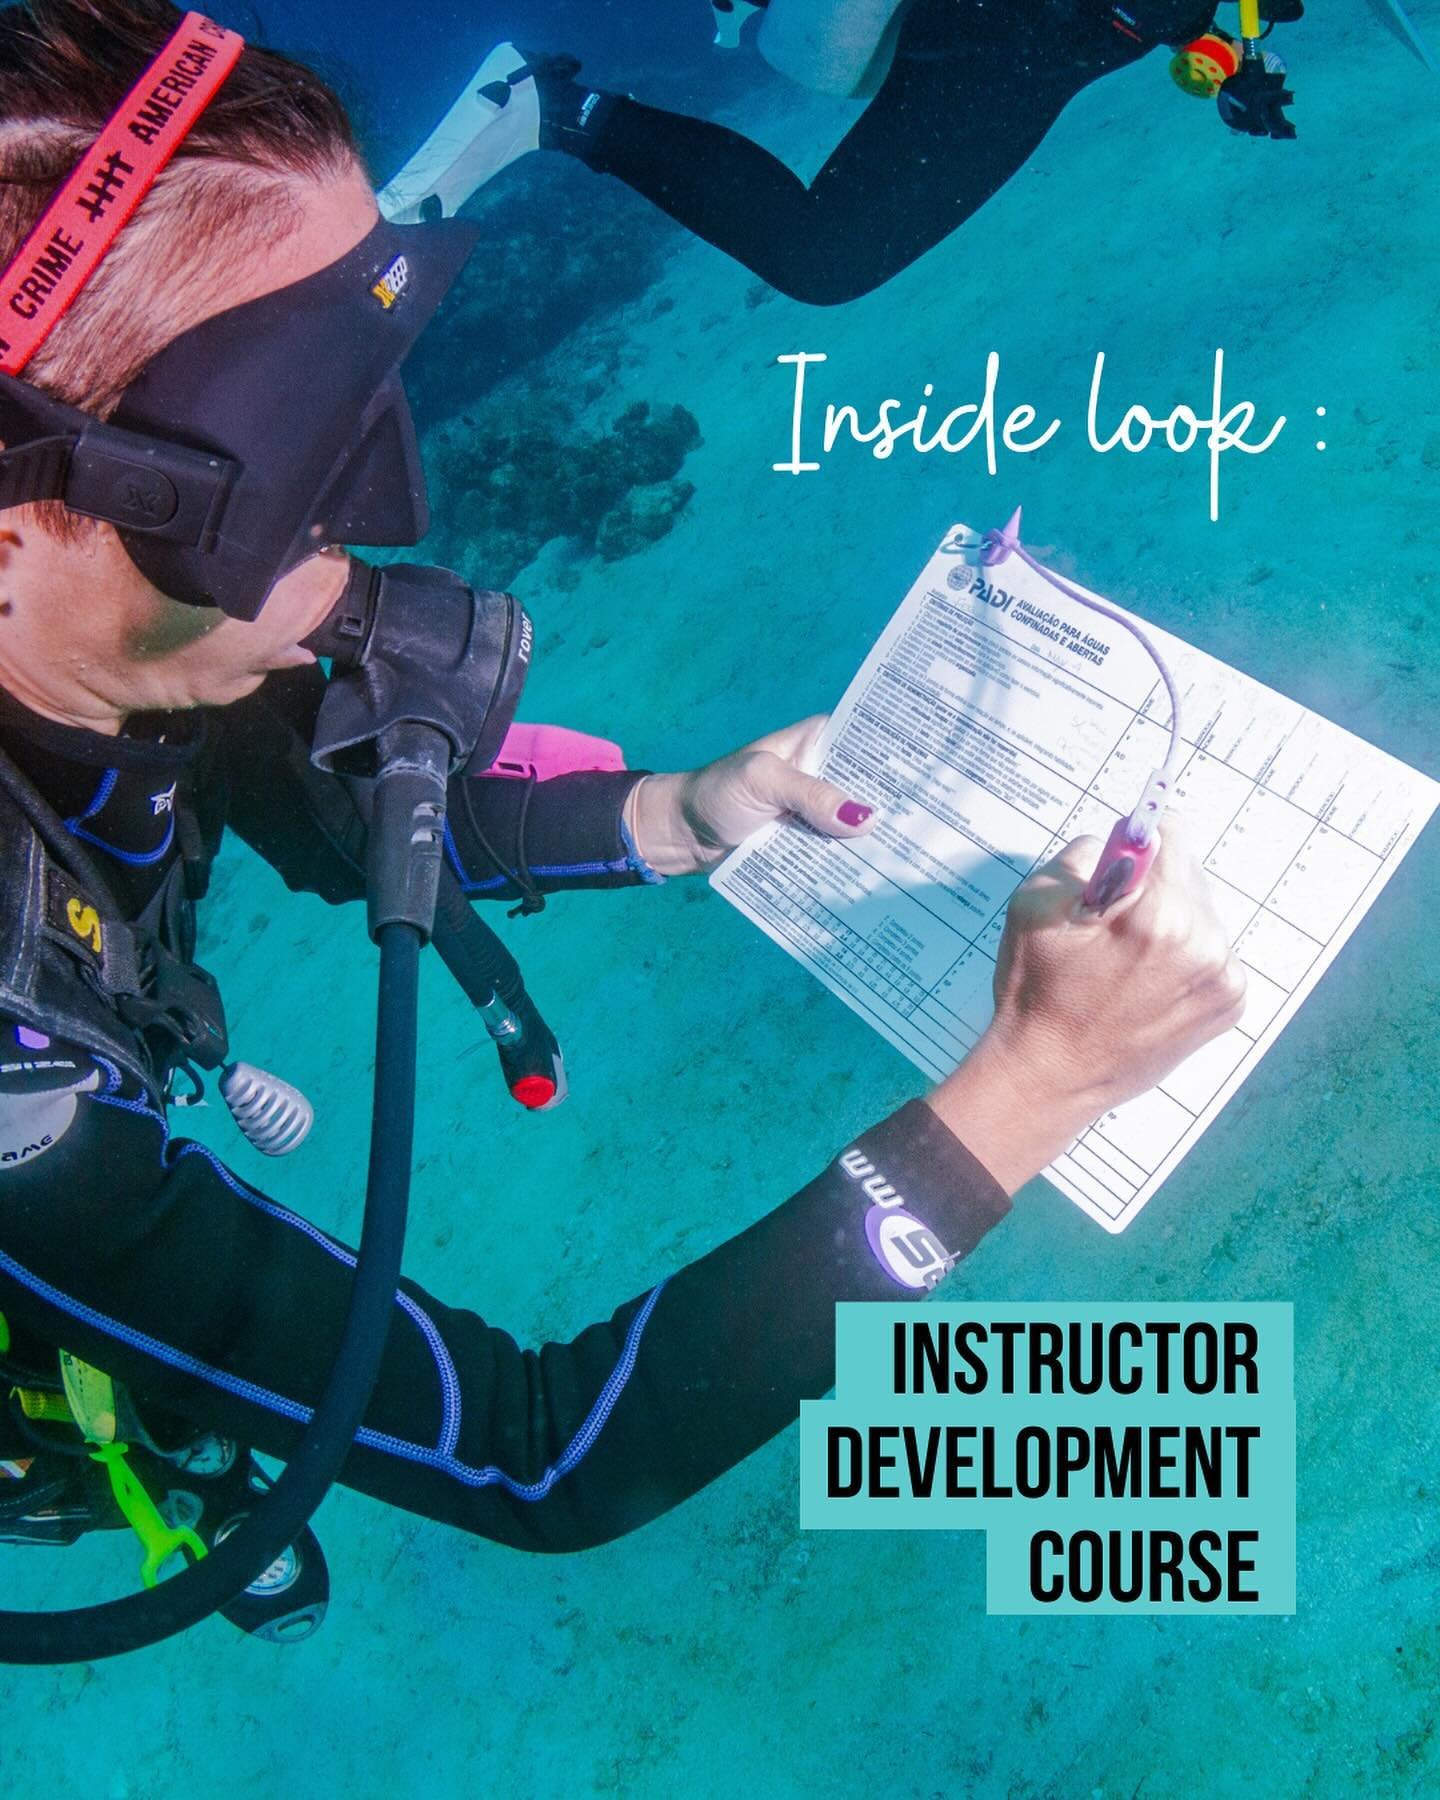 SWIPE ➡️ if you&rsquo;re curious about what goes on in the Instructor Development Course (IDC)!

We&rsquo;ve just finished up our most recent IDC and want to give you an inside look at what the course is all about. Thanks to @deep.uw.photos we&rsquo;